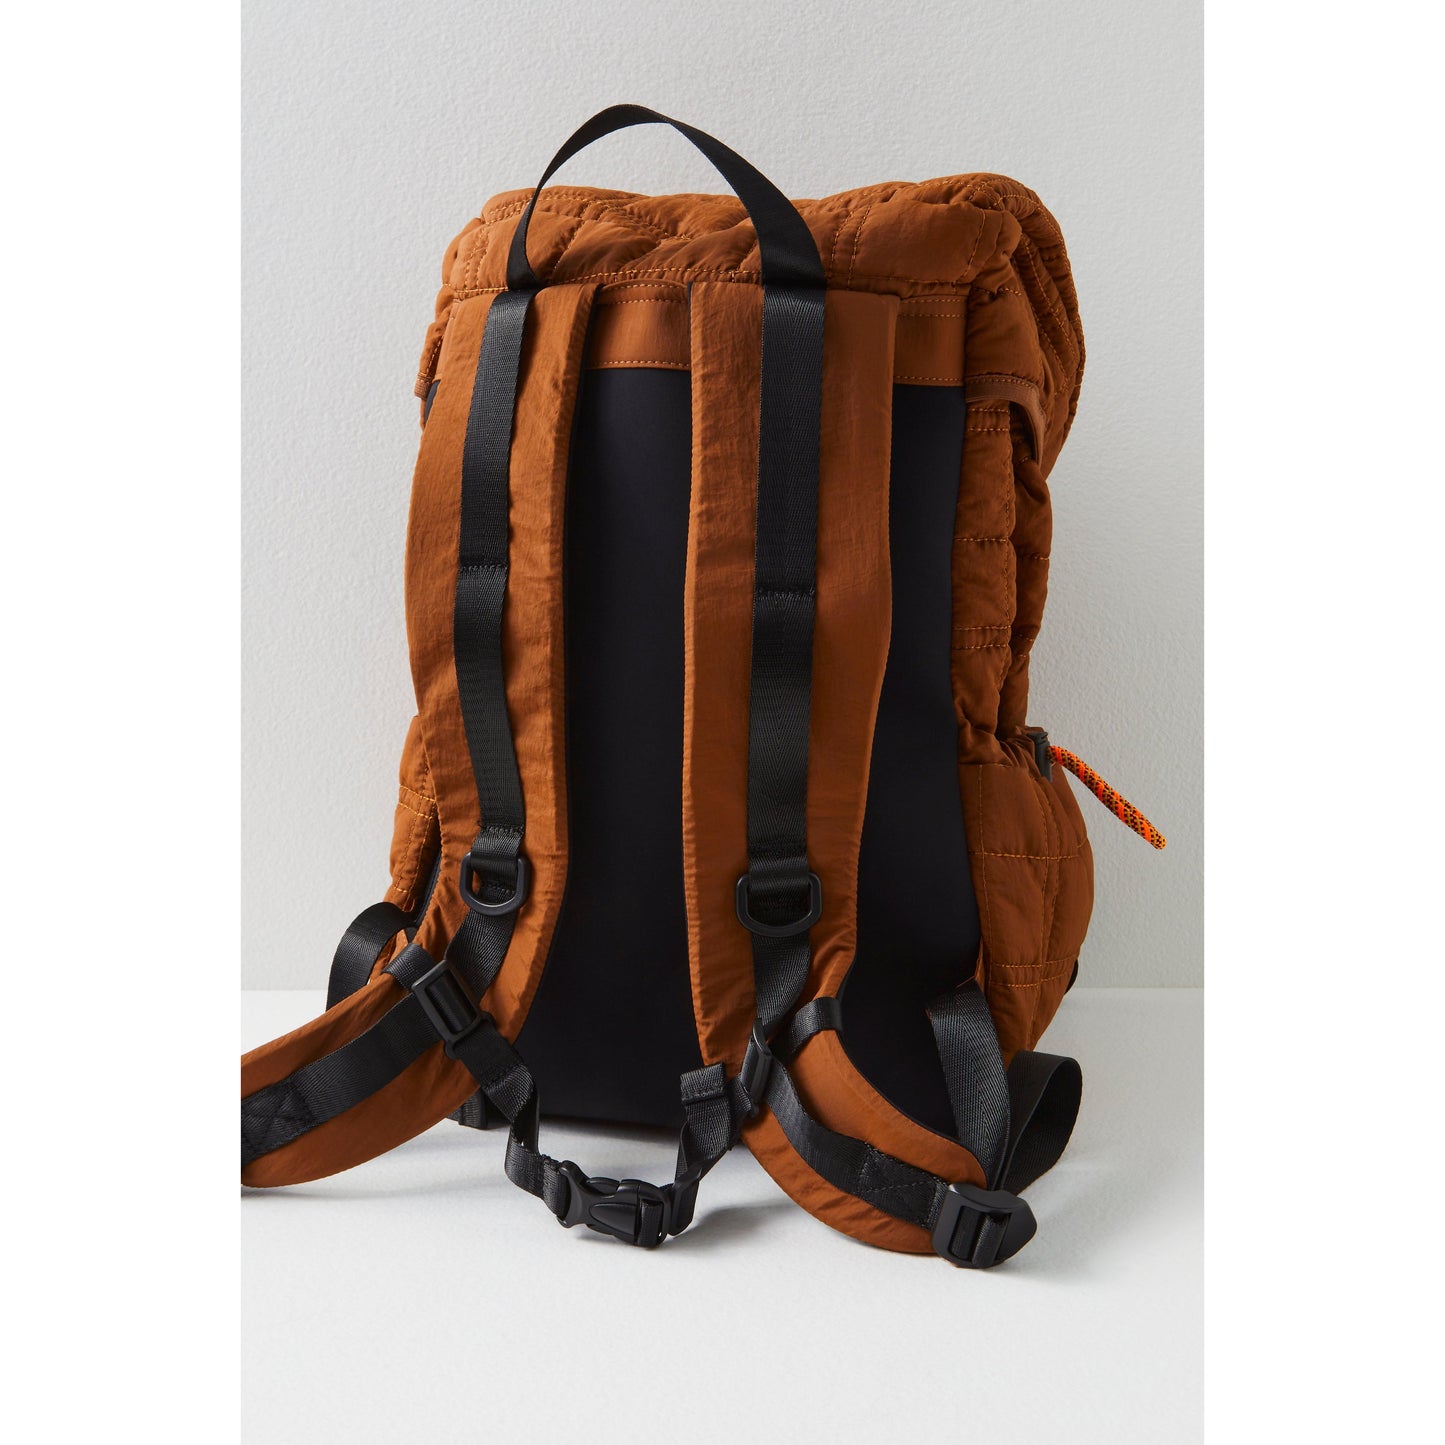 Brown Summit Backpack with padded straps and buckles, standing against a light gray background by Free People Movement.